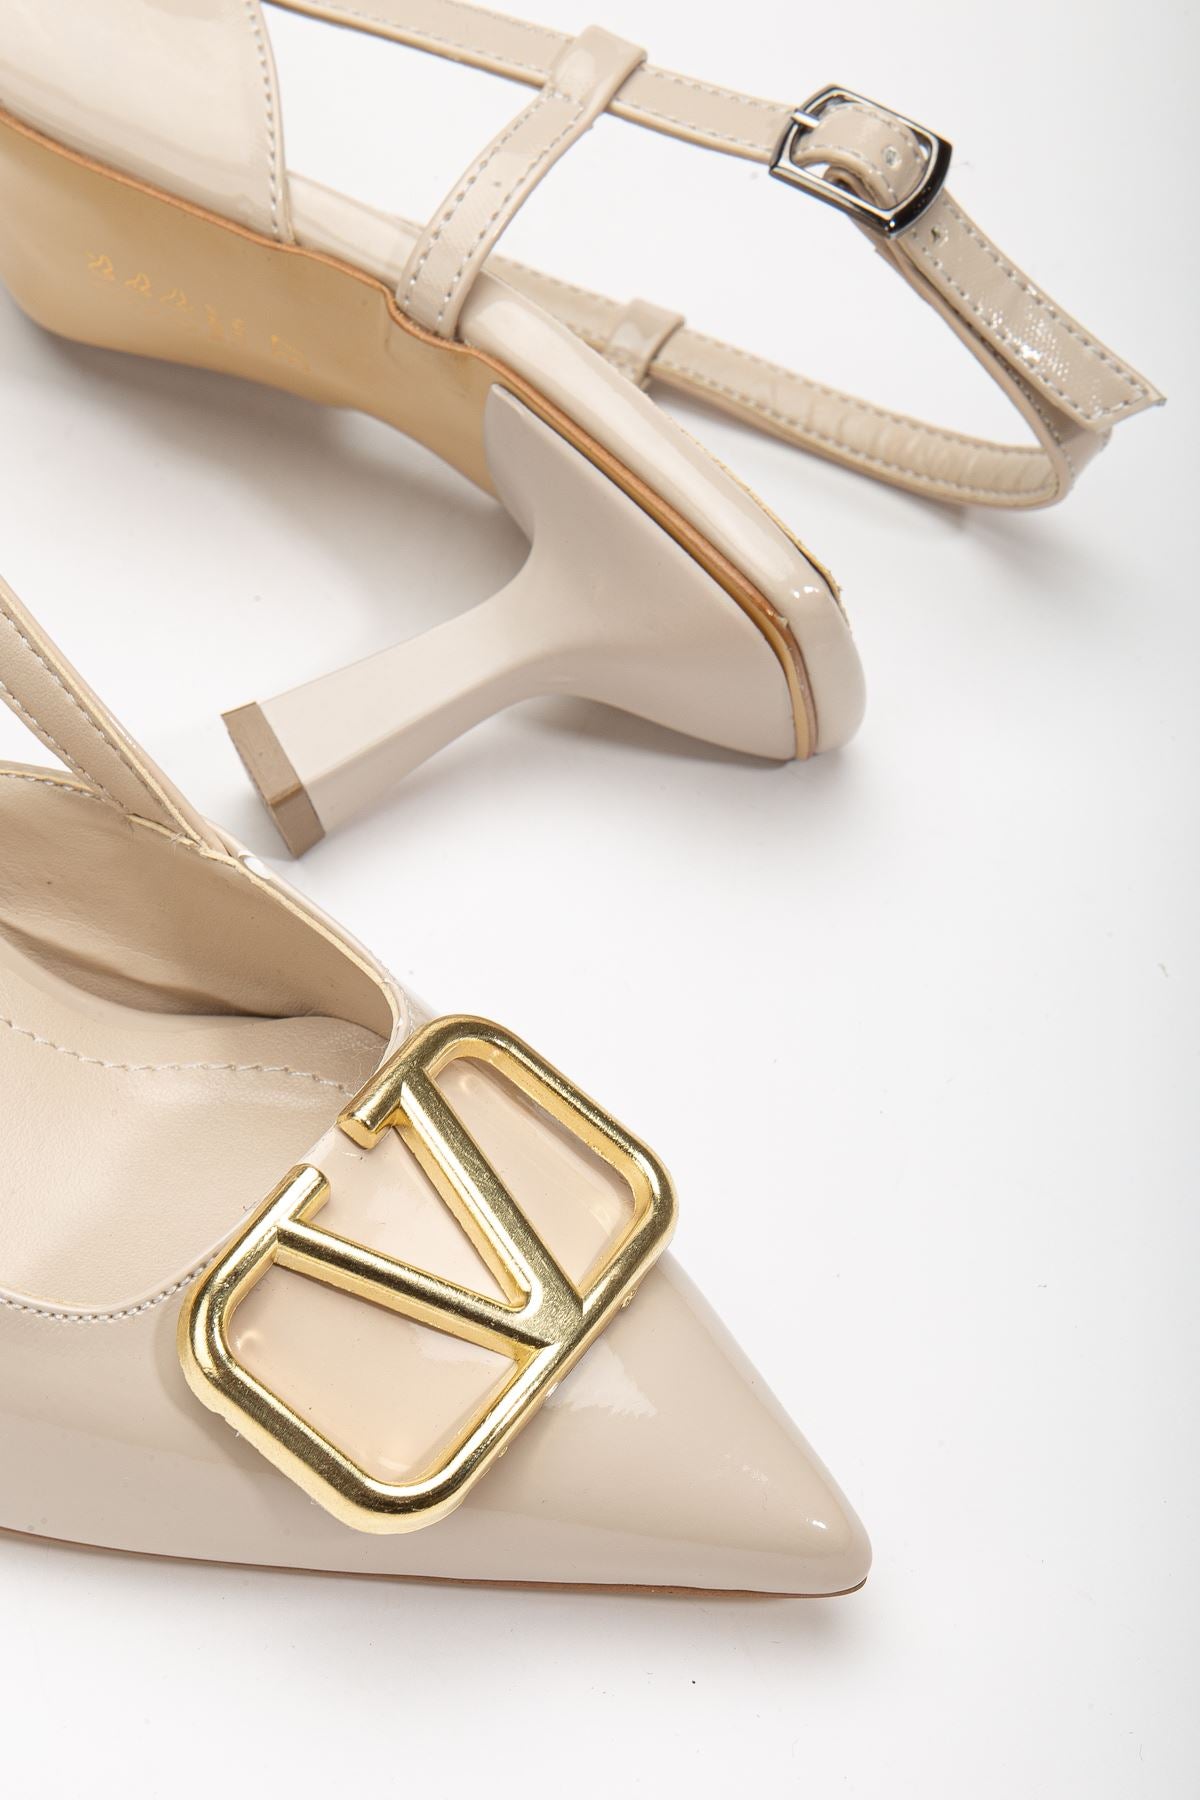 Women's Lianne Cream Patent Leather Buckle Detailed Thin Heeled Shoes - STREETMODE ™